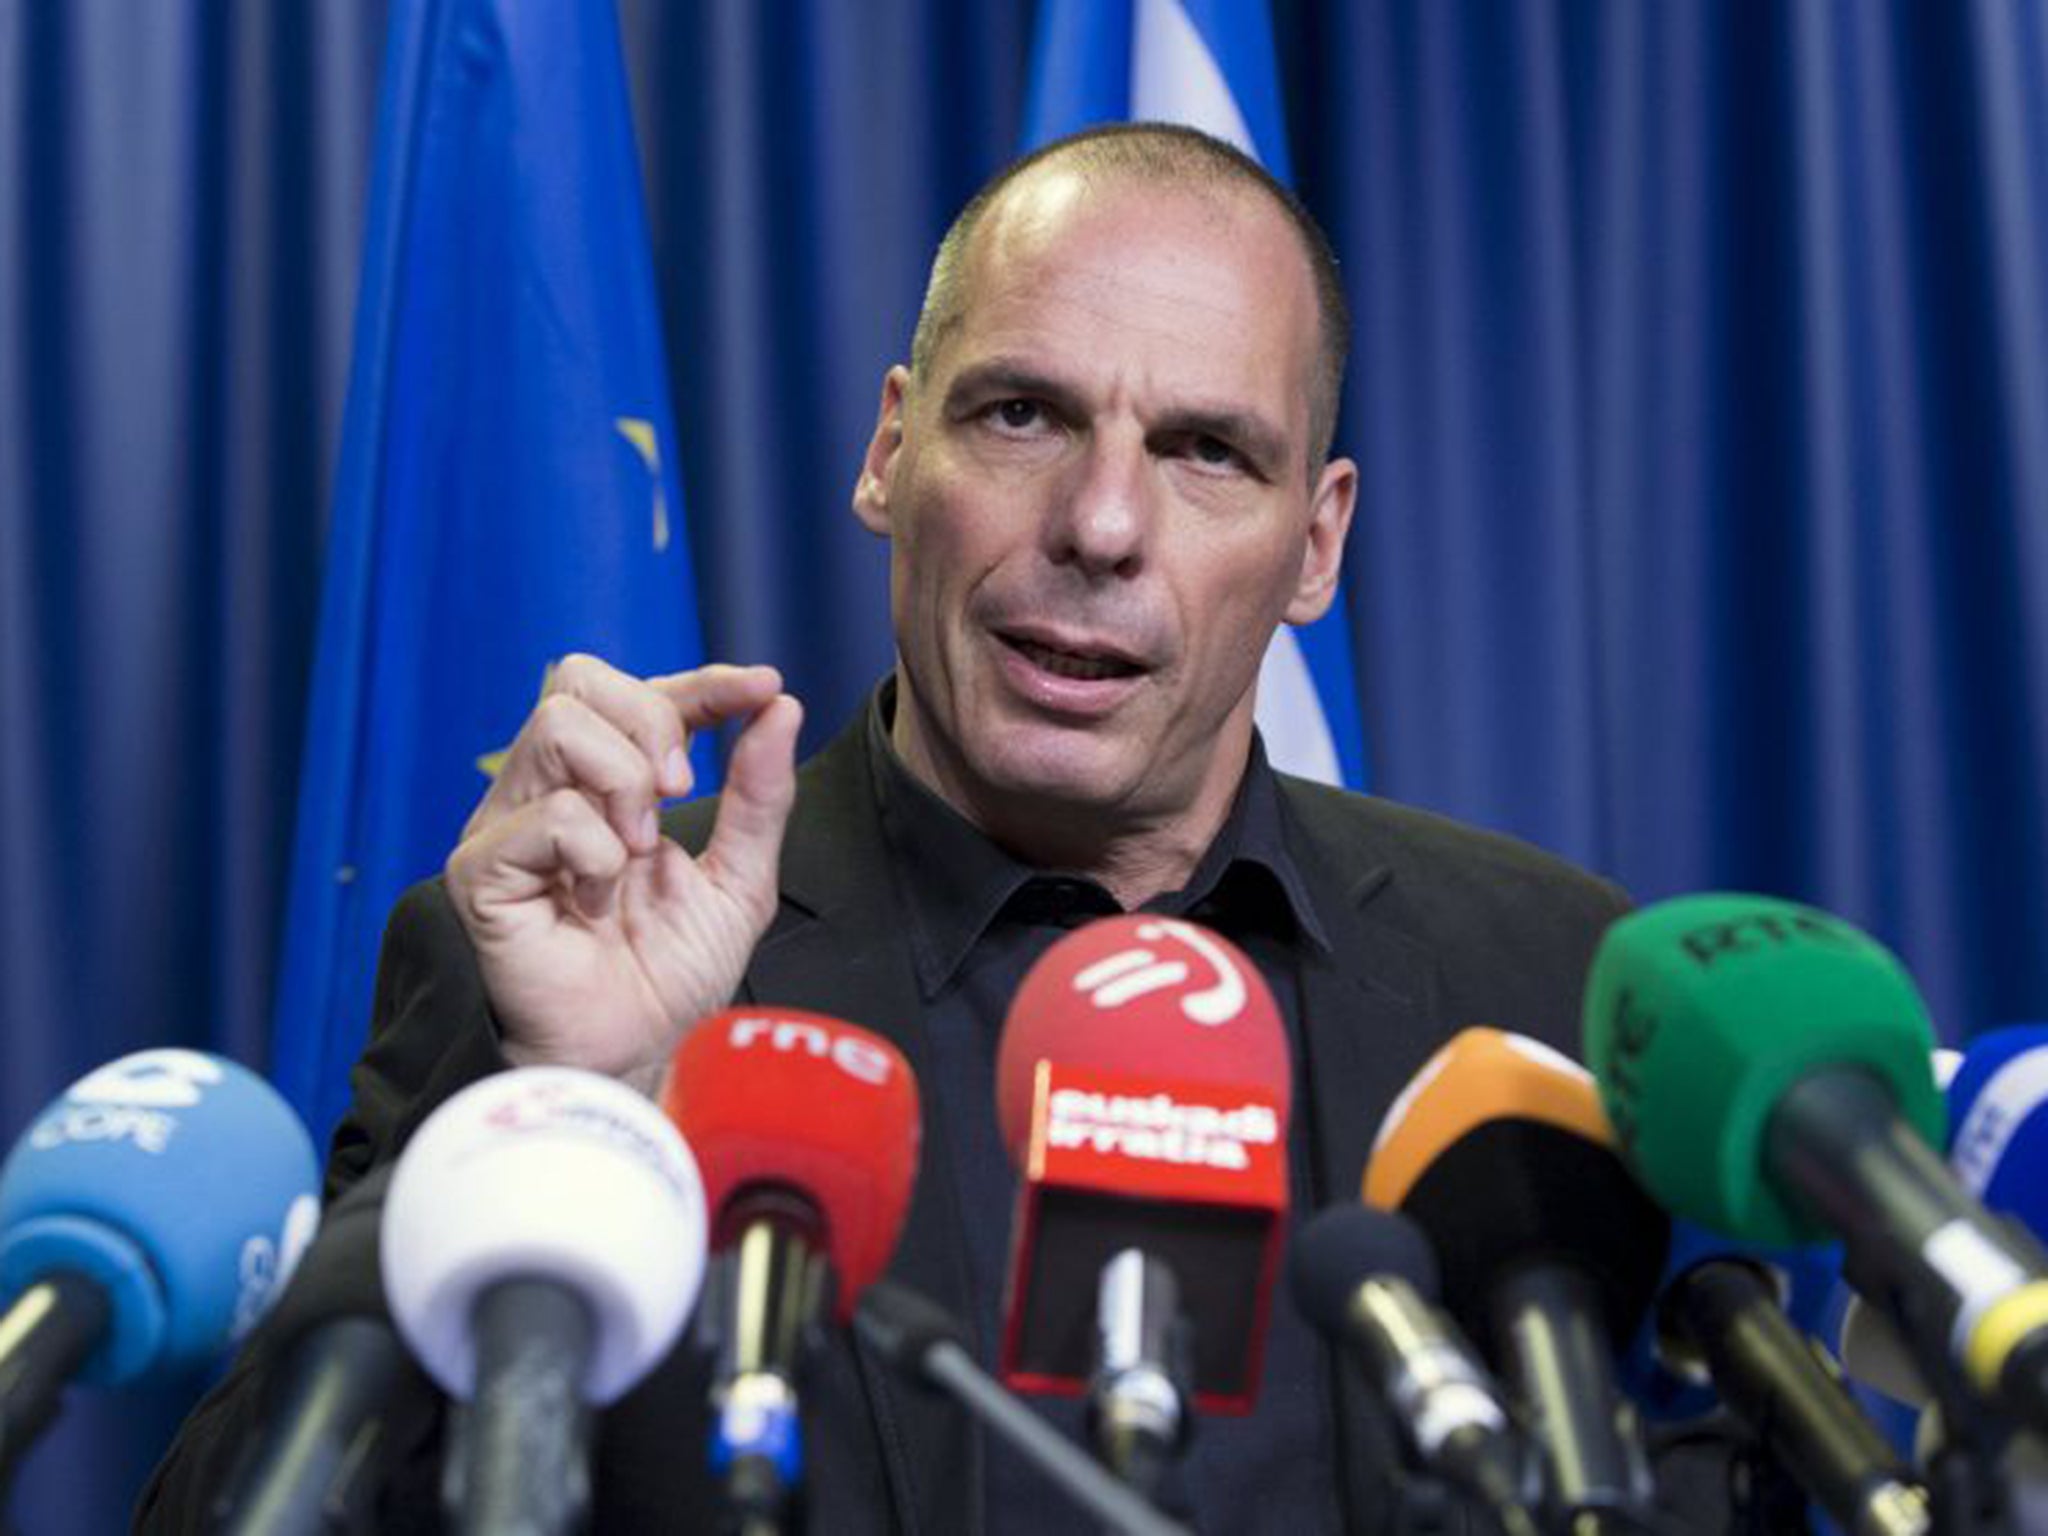 Greek Finance minister Yanis Varoufakis has pledged to resign if his country votes “yes” to the bailout plan (Reuters)